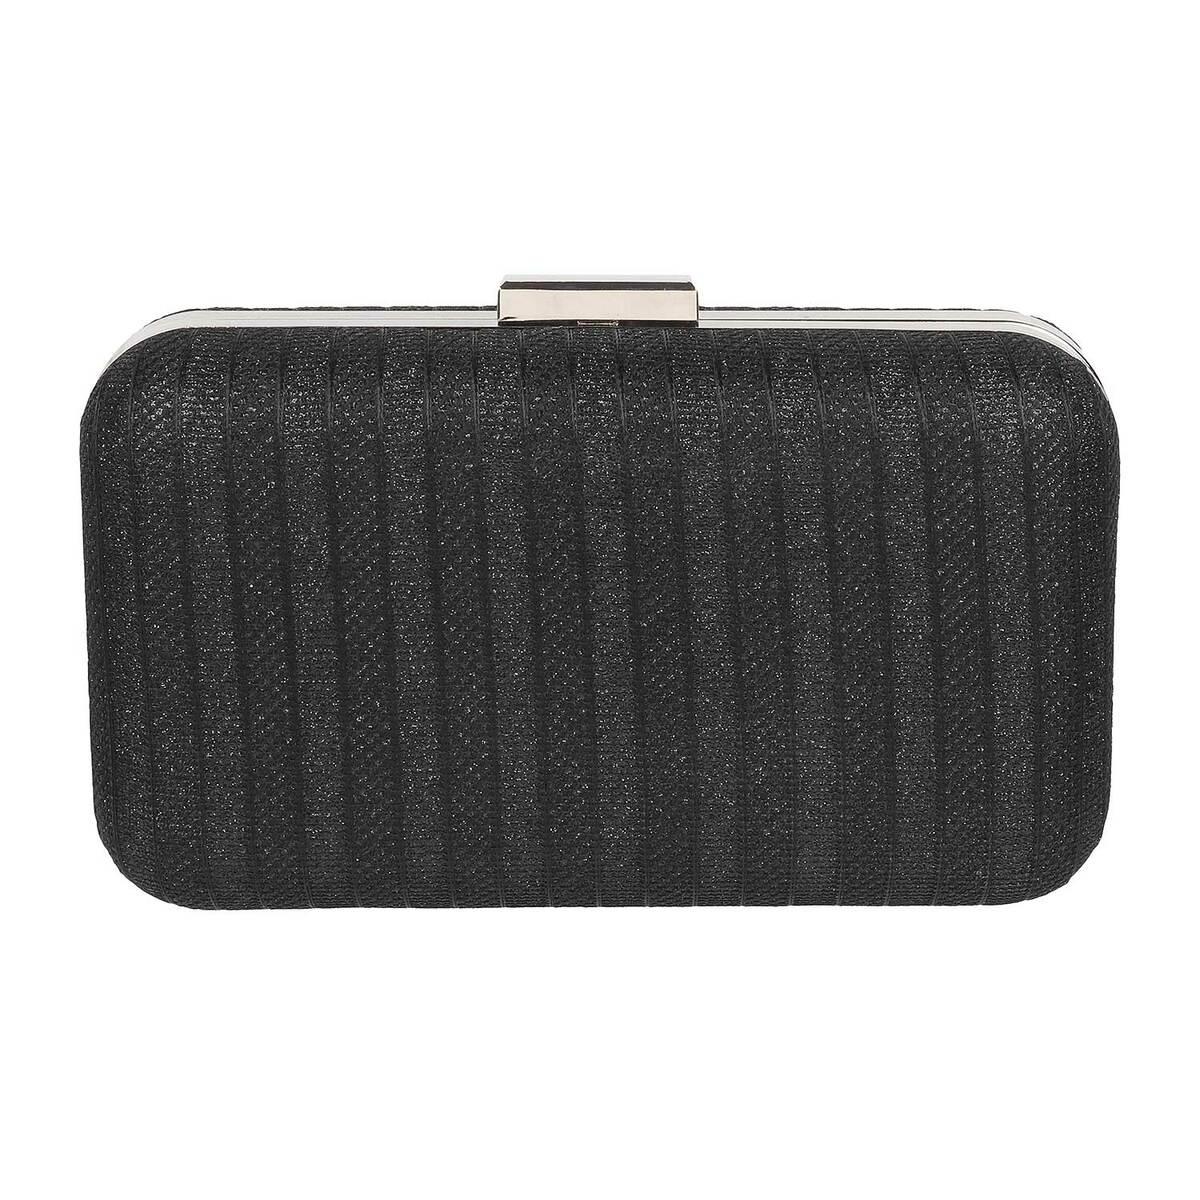 clutch purses for women Clutches for Women Wedding Clutches for Women Clutch  Evening Purses and Clutches Clutch Purses for WomenBlack  Amazonin  Fashion